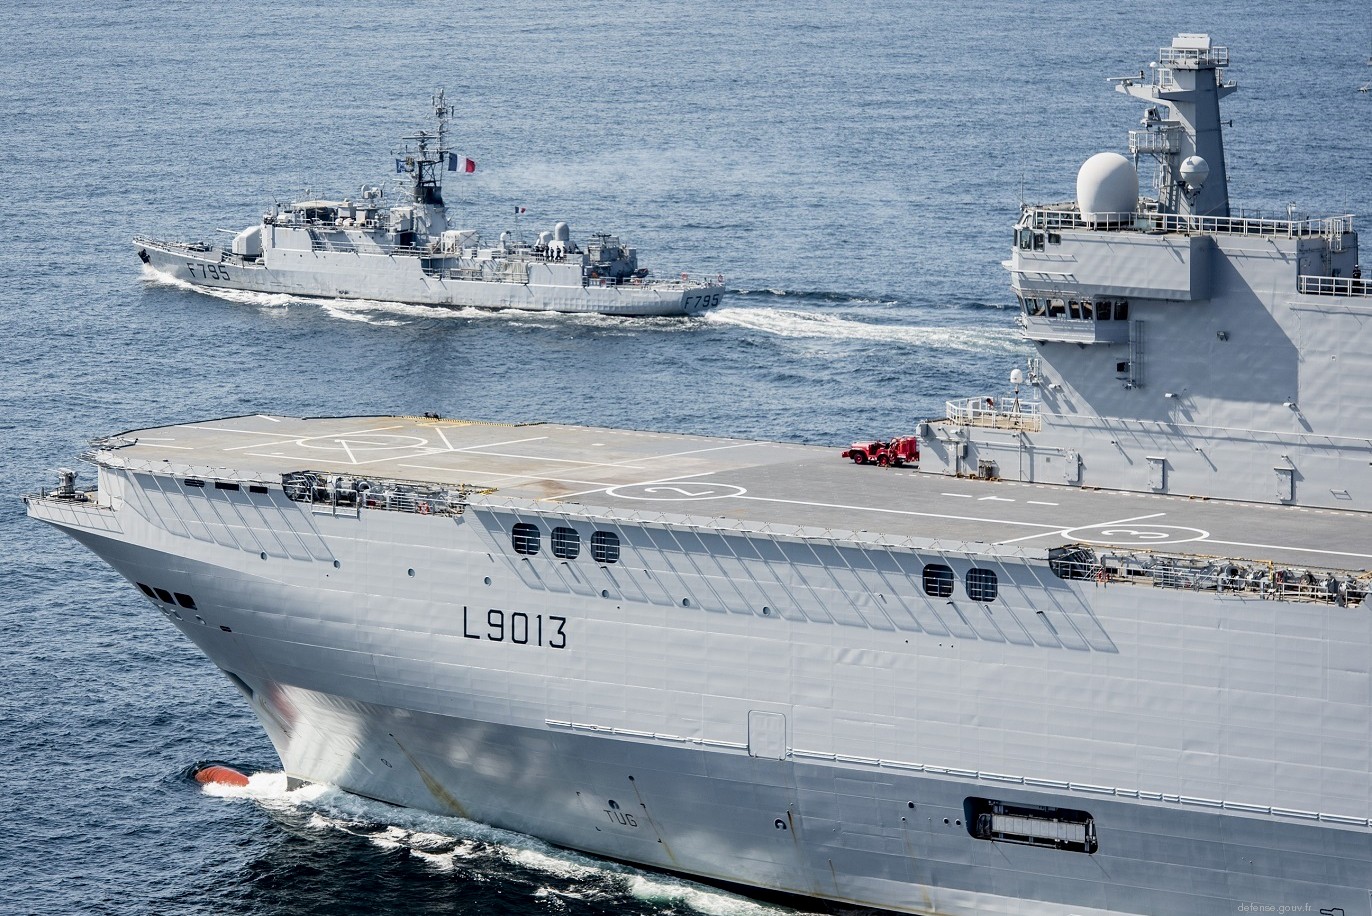 l-9013 fs mistral amphibious assault command ship french navy marine nationale 41